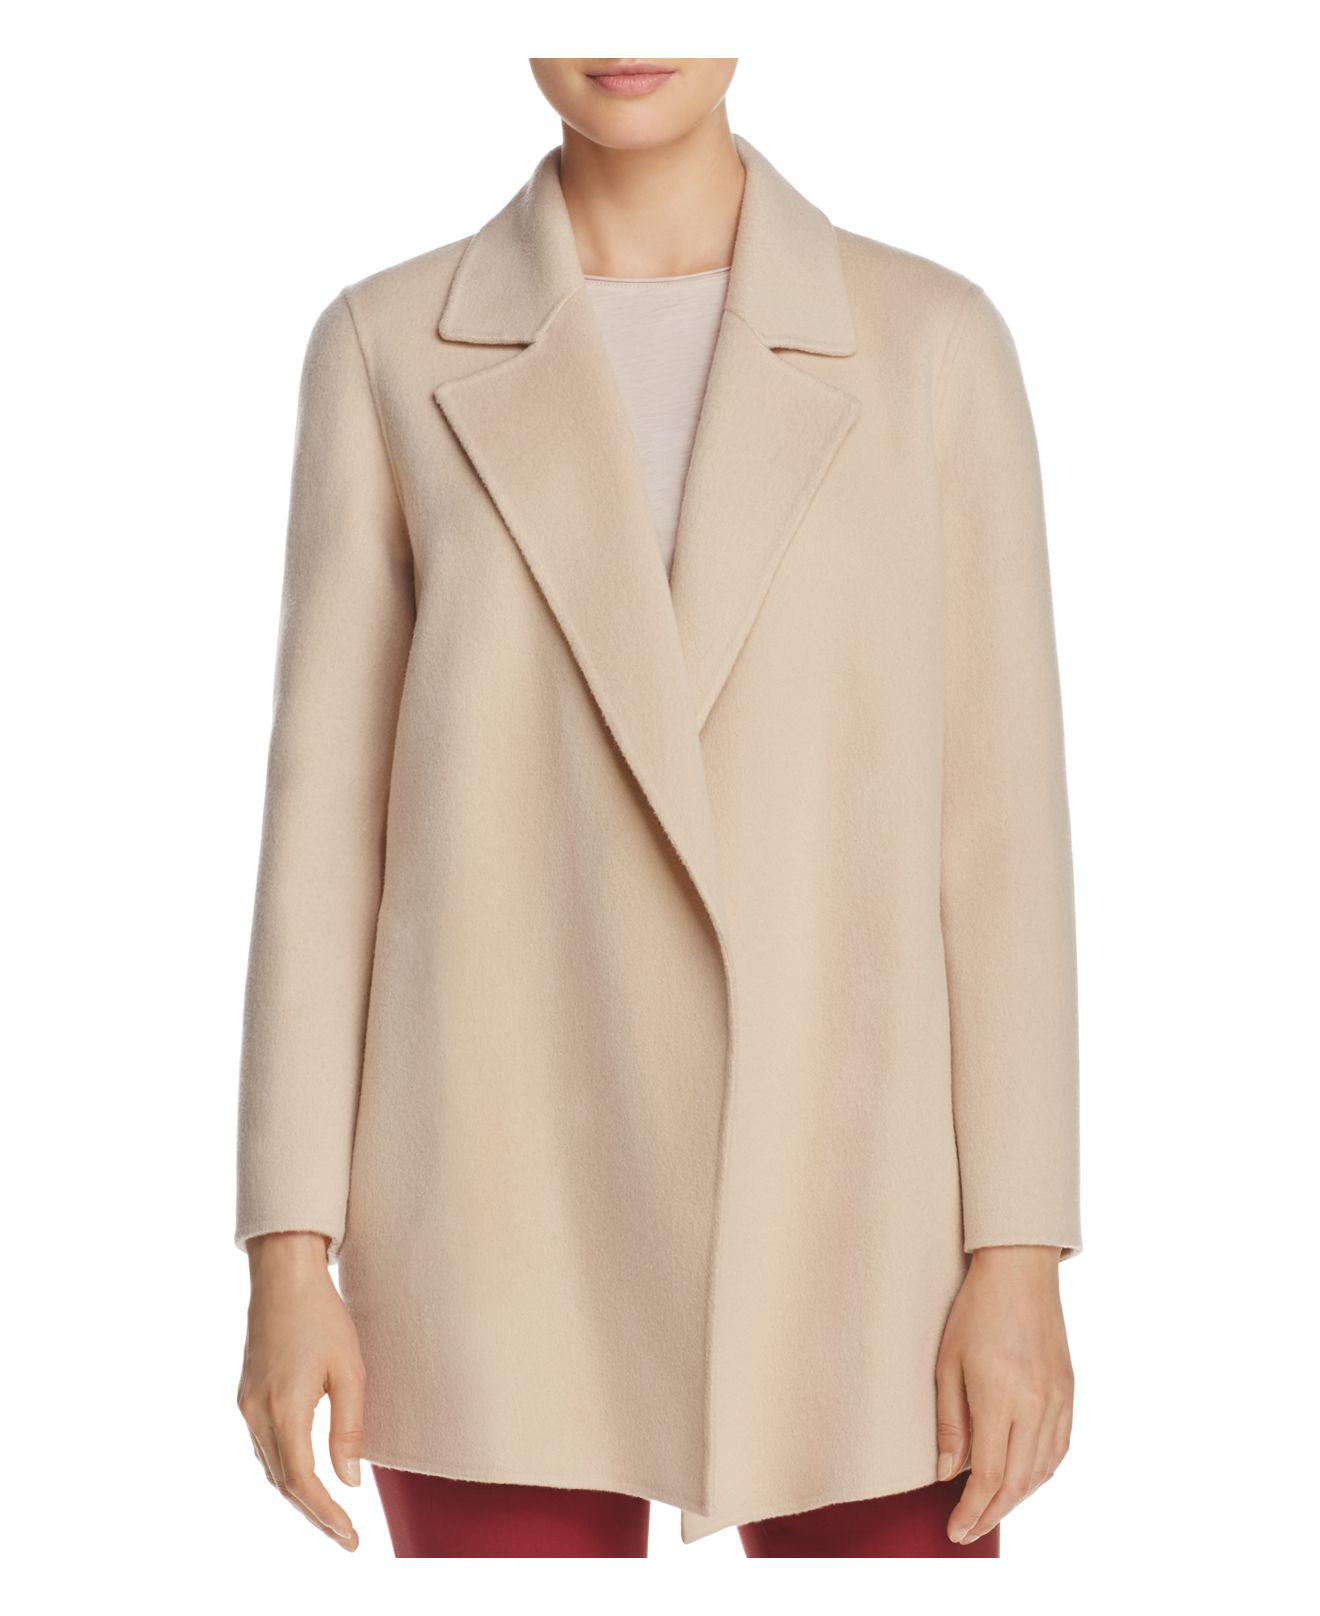 Lyst - Theory Clairene Double-face Wool And Cashmere Jacket